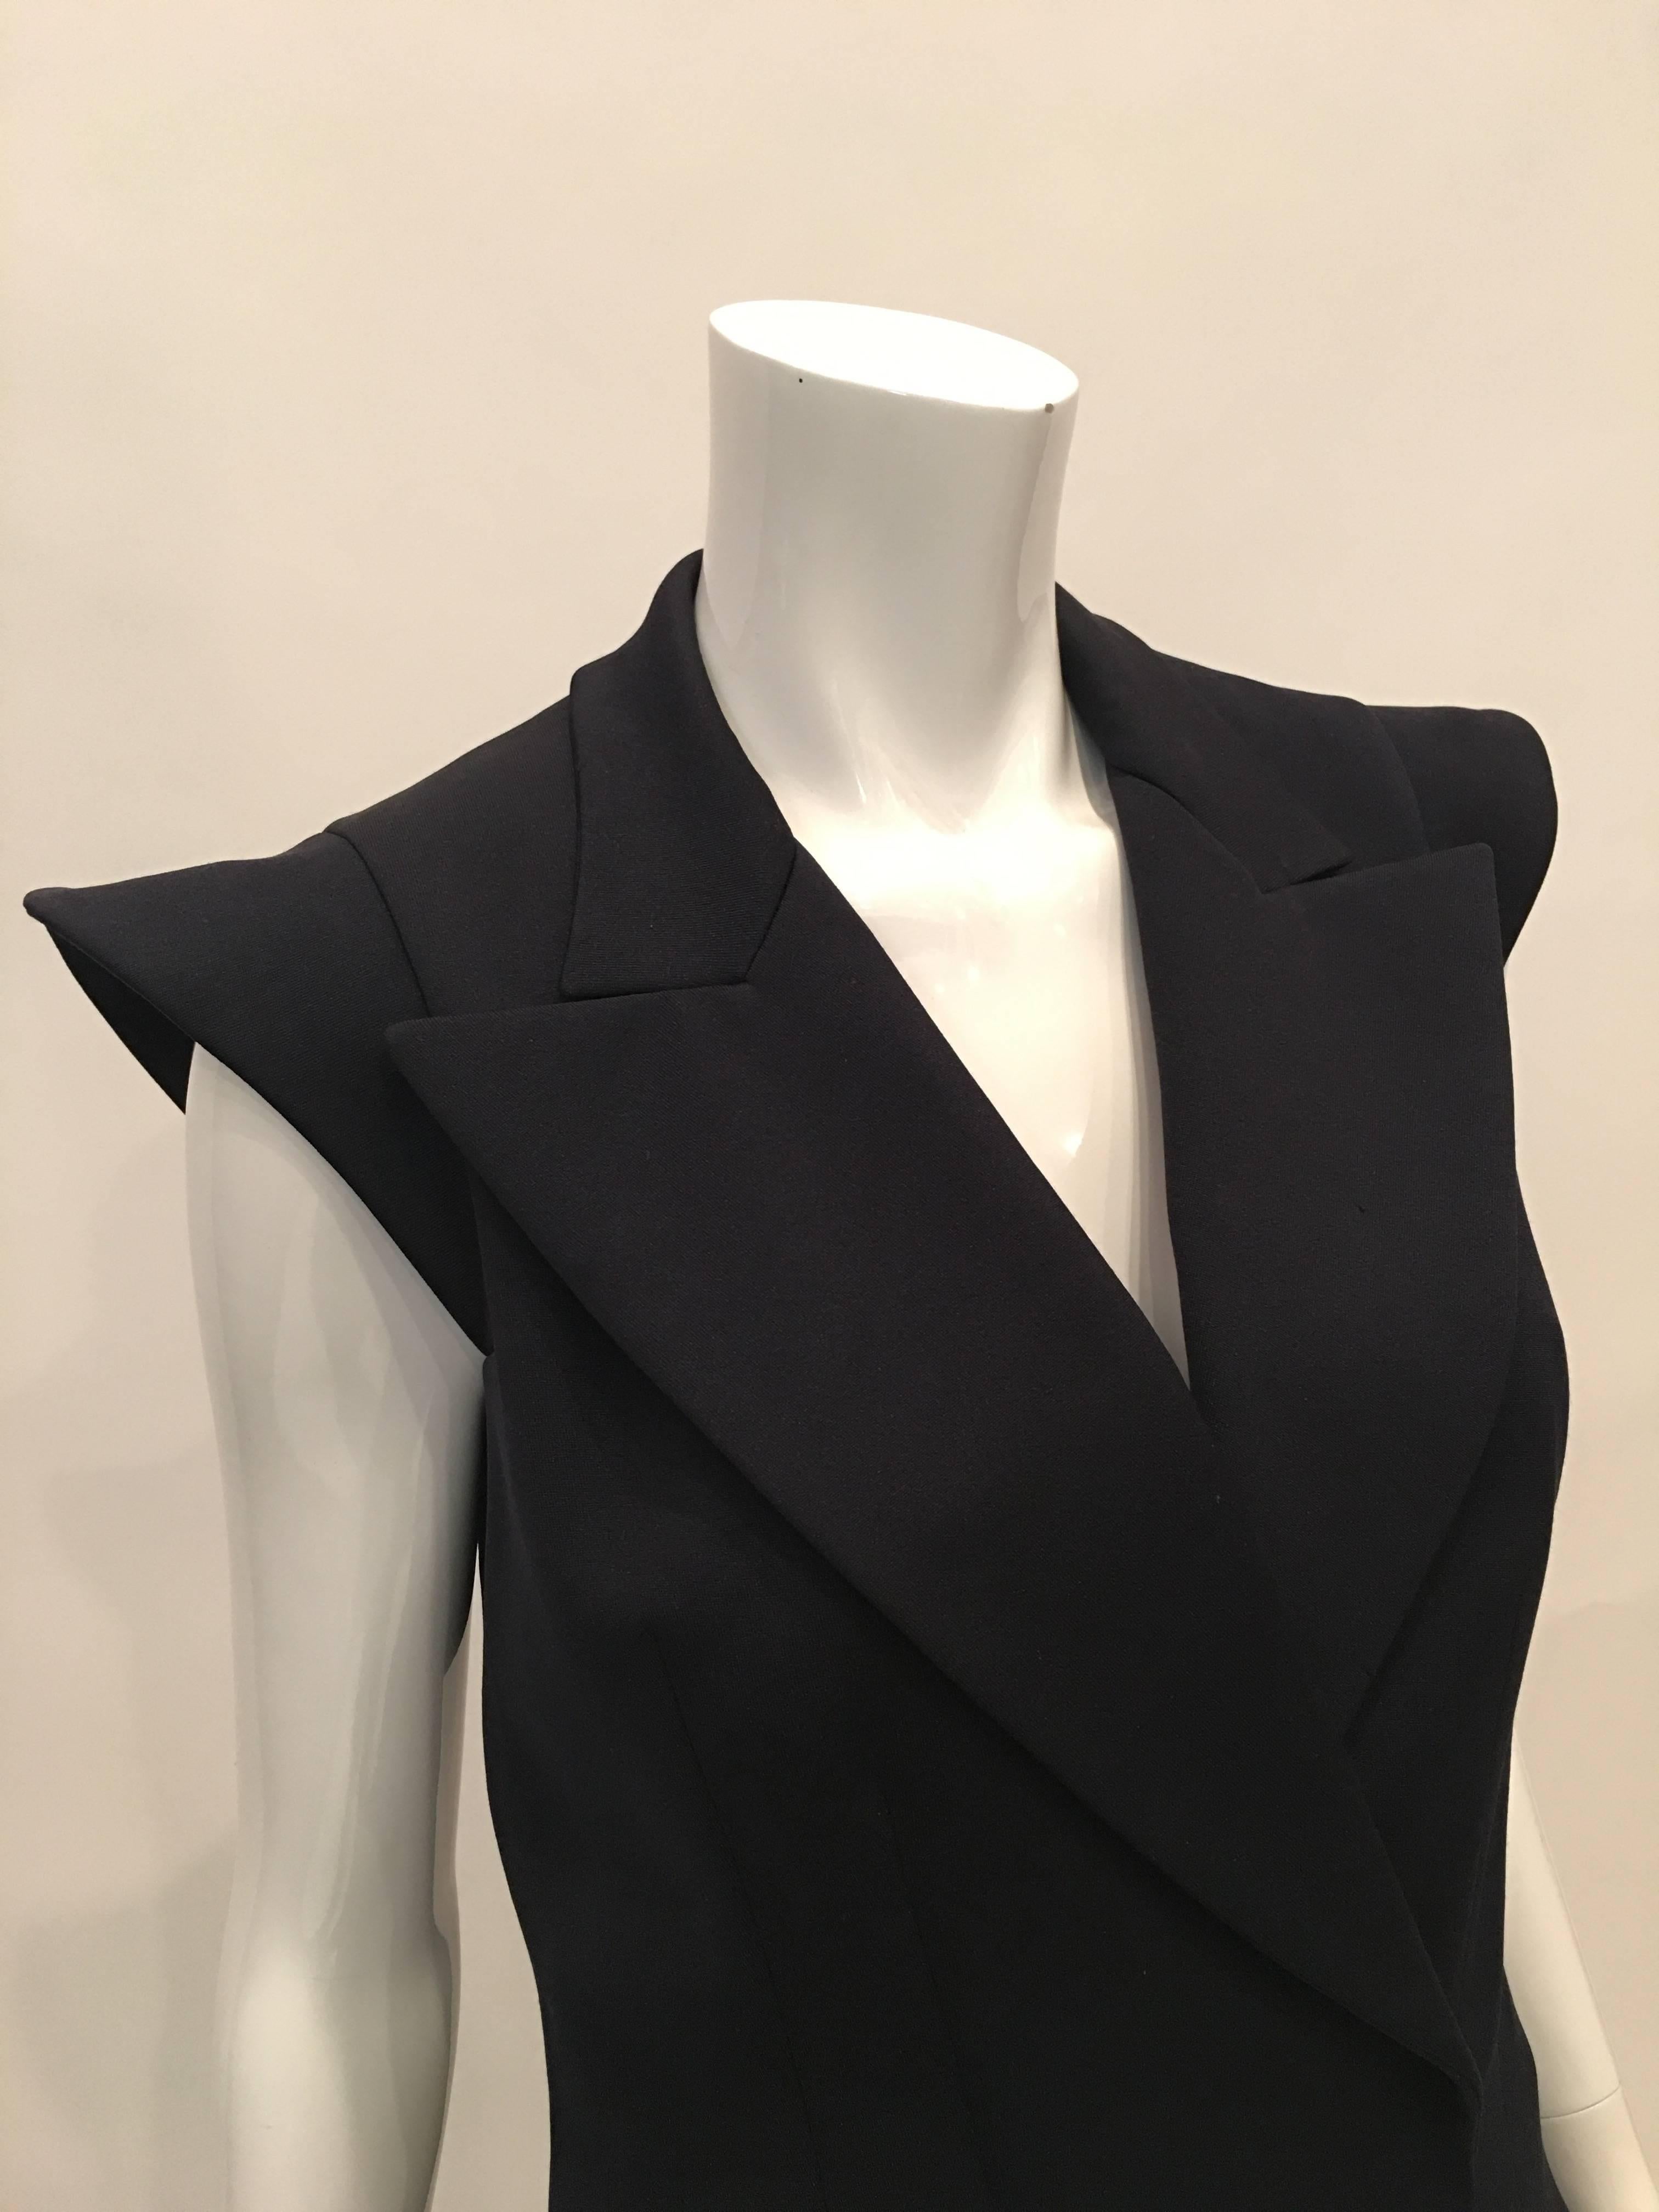 Yves Saint Laurent Wool Midnight Blue Double Breasted Vest with 2 front pockets.

Size Label : 38 (French)

*ALL MEASUREMENTS TAKEN FLAT*

Mannequin measures size 4 , vest fits mannequin 
Shoulder to shoulder - 13 inches
Armpit to armpit - 17